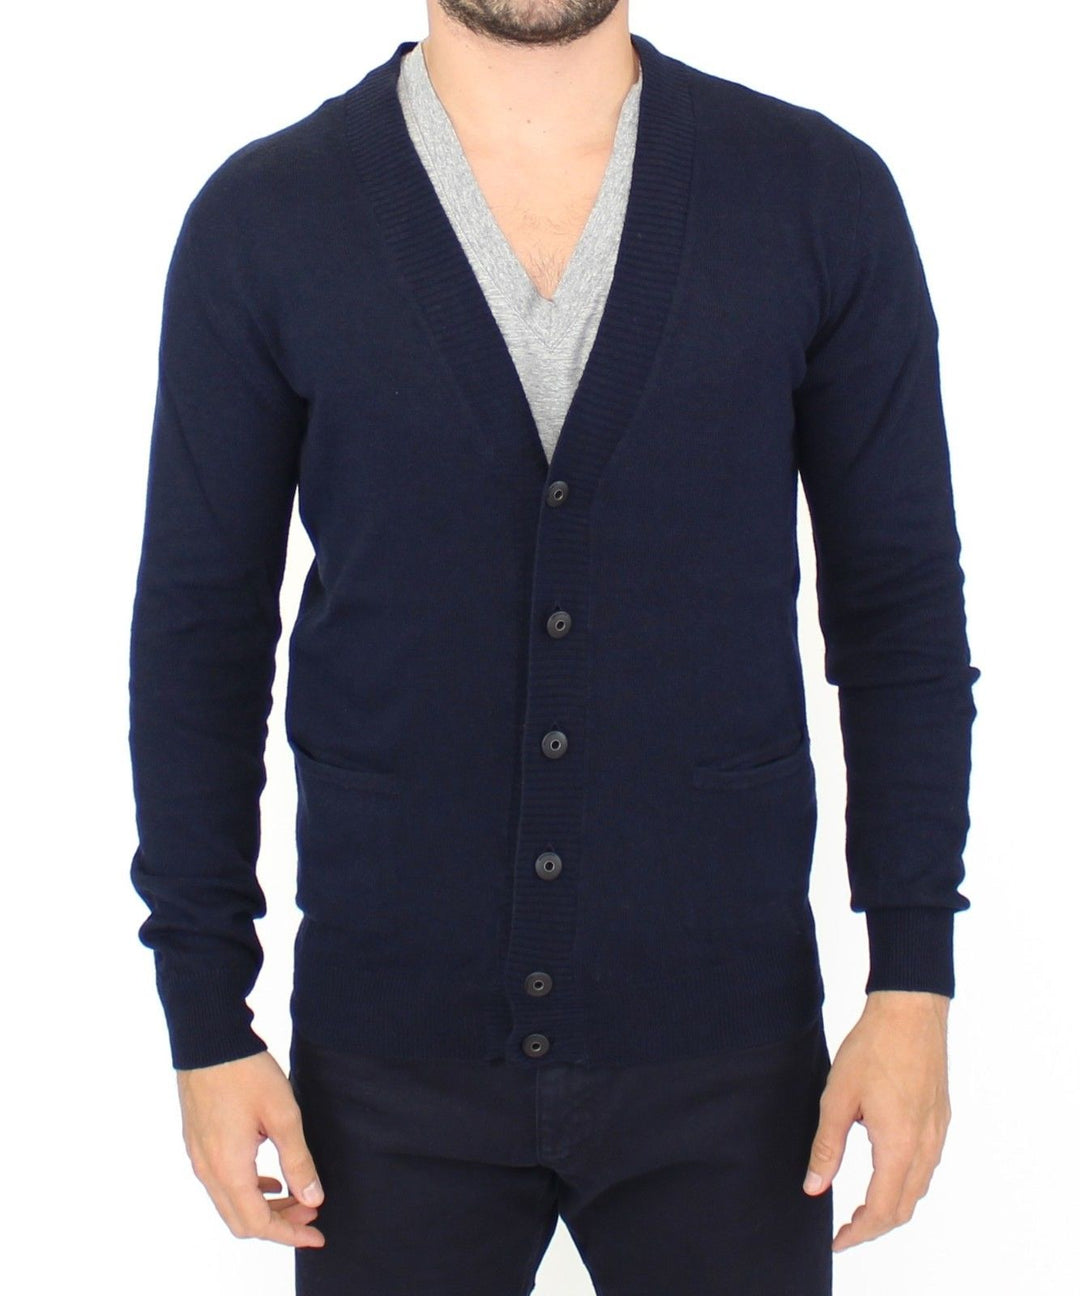 Ermanno Scervino Chic Blue Wool Blend Cardigan Sweater